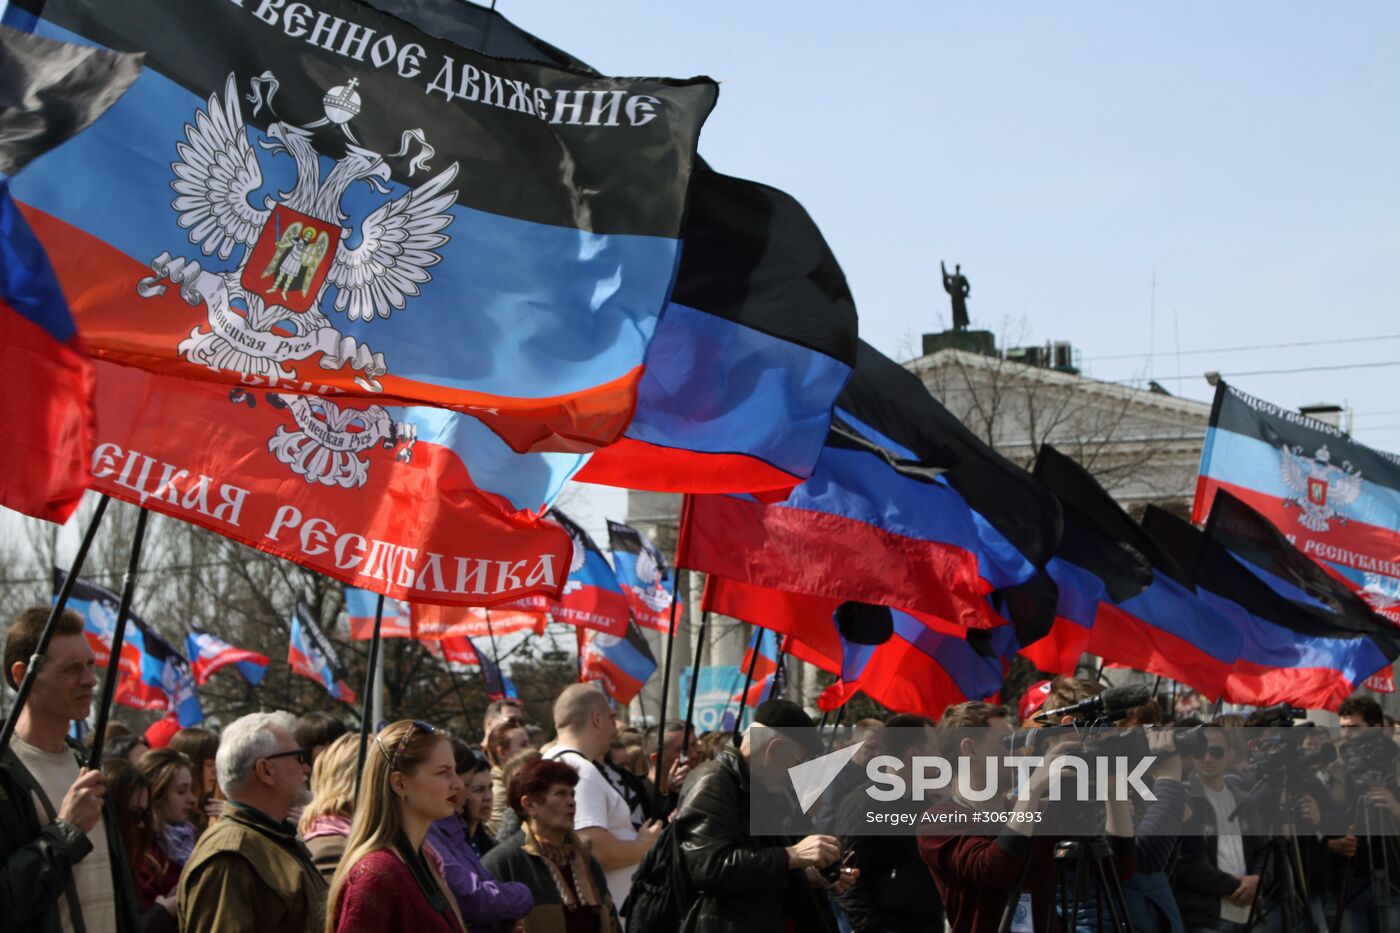 Rally in Donetsk marks anniversary of Donetsk People's Republic